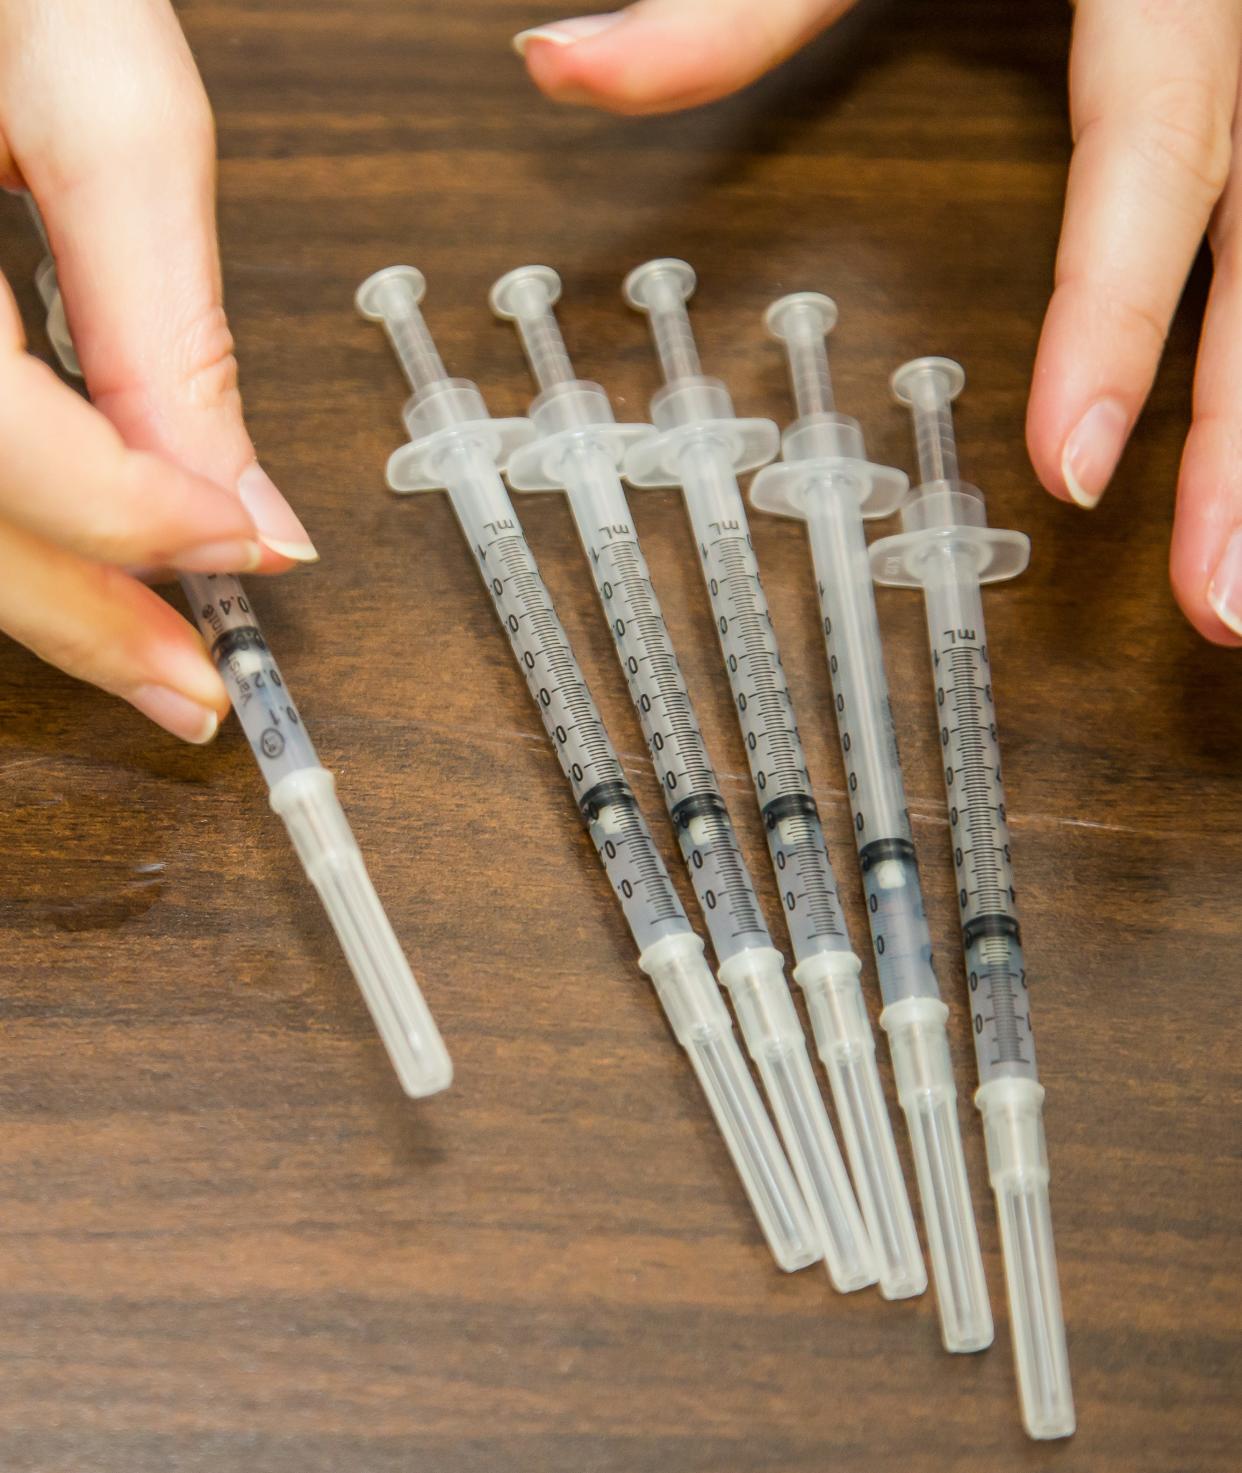 Syringes with the Pfizer COVID-19 vaccine.